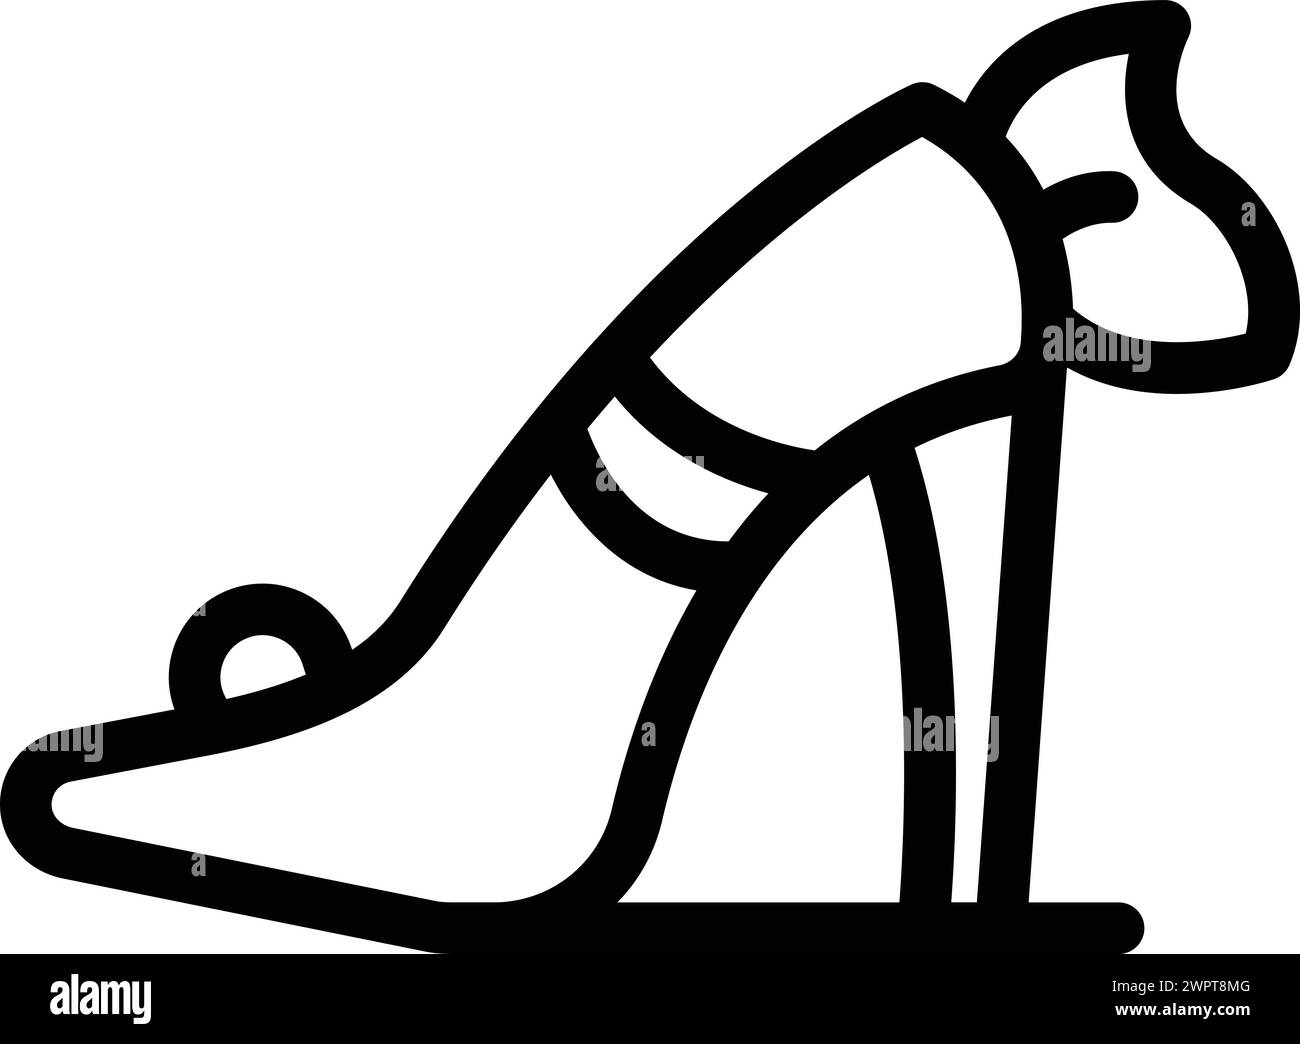 Tall footwear icon outline vector. Classy stiletto shoes. Voguish glamorous high heels Stock Vector